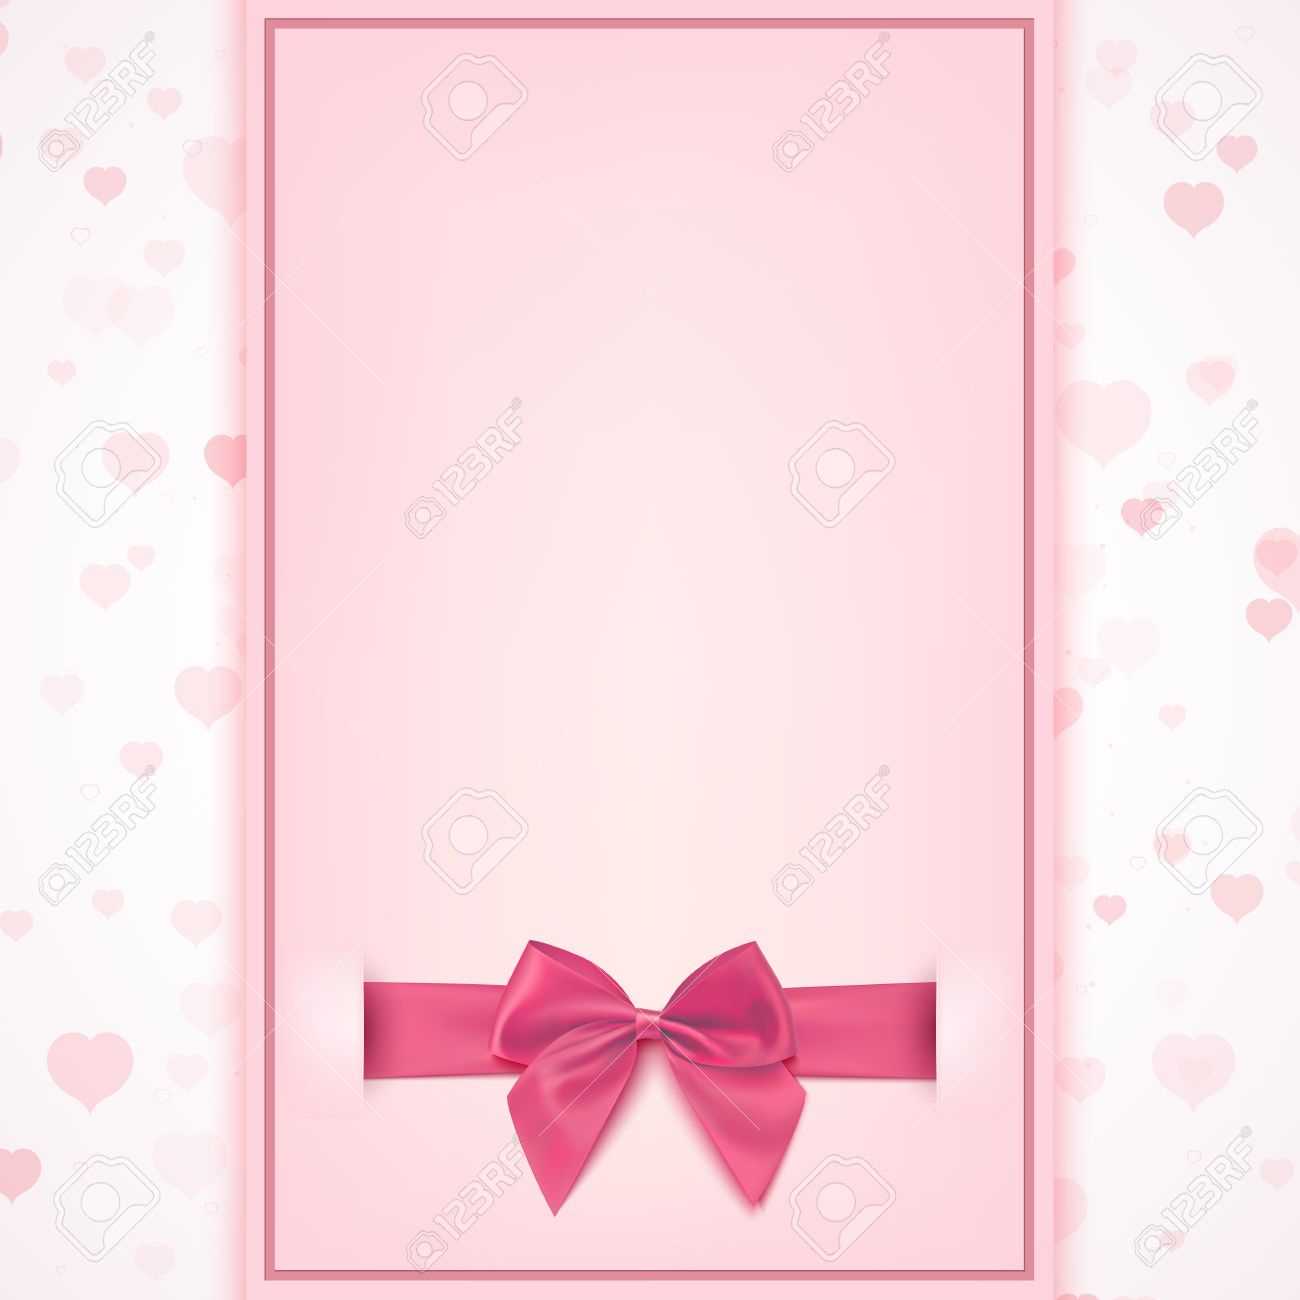 Blank Greeting Card Template For Baby Girl Shower Celebration,.. In Free Printable Blank Greeting Card Templates